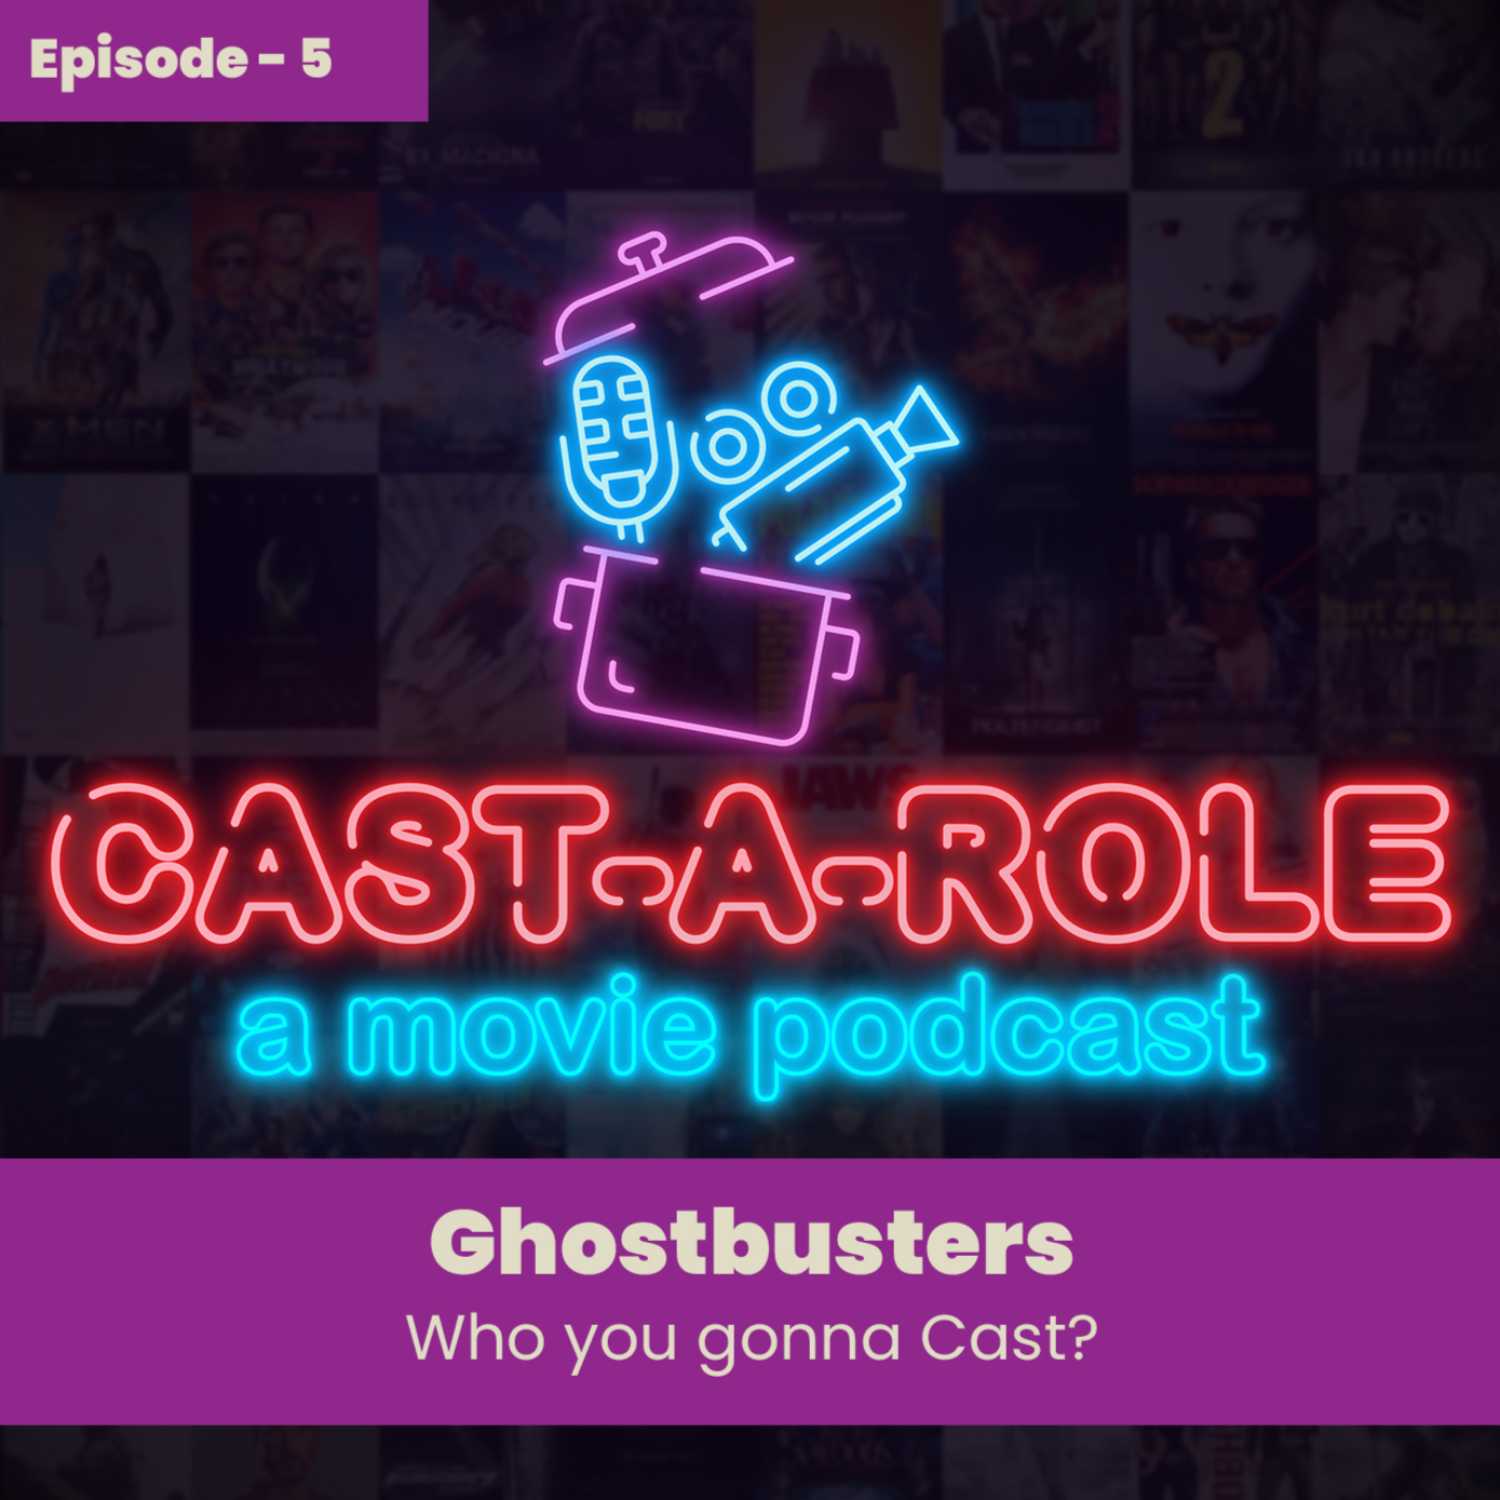 Episode 5 - Ghostbusters, Who You Gonna Cast?